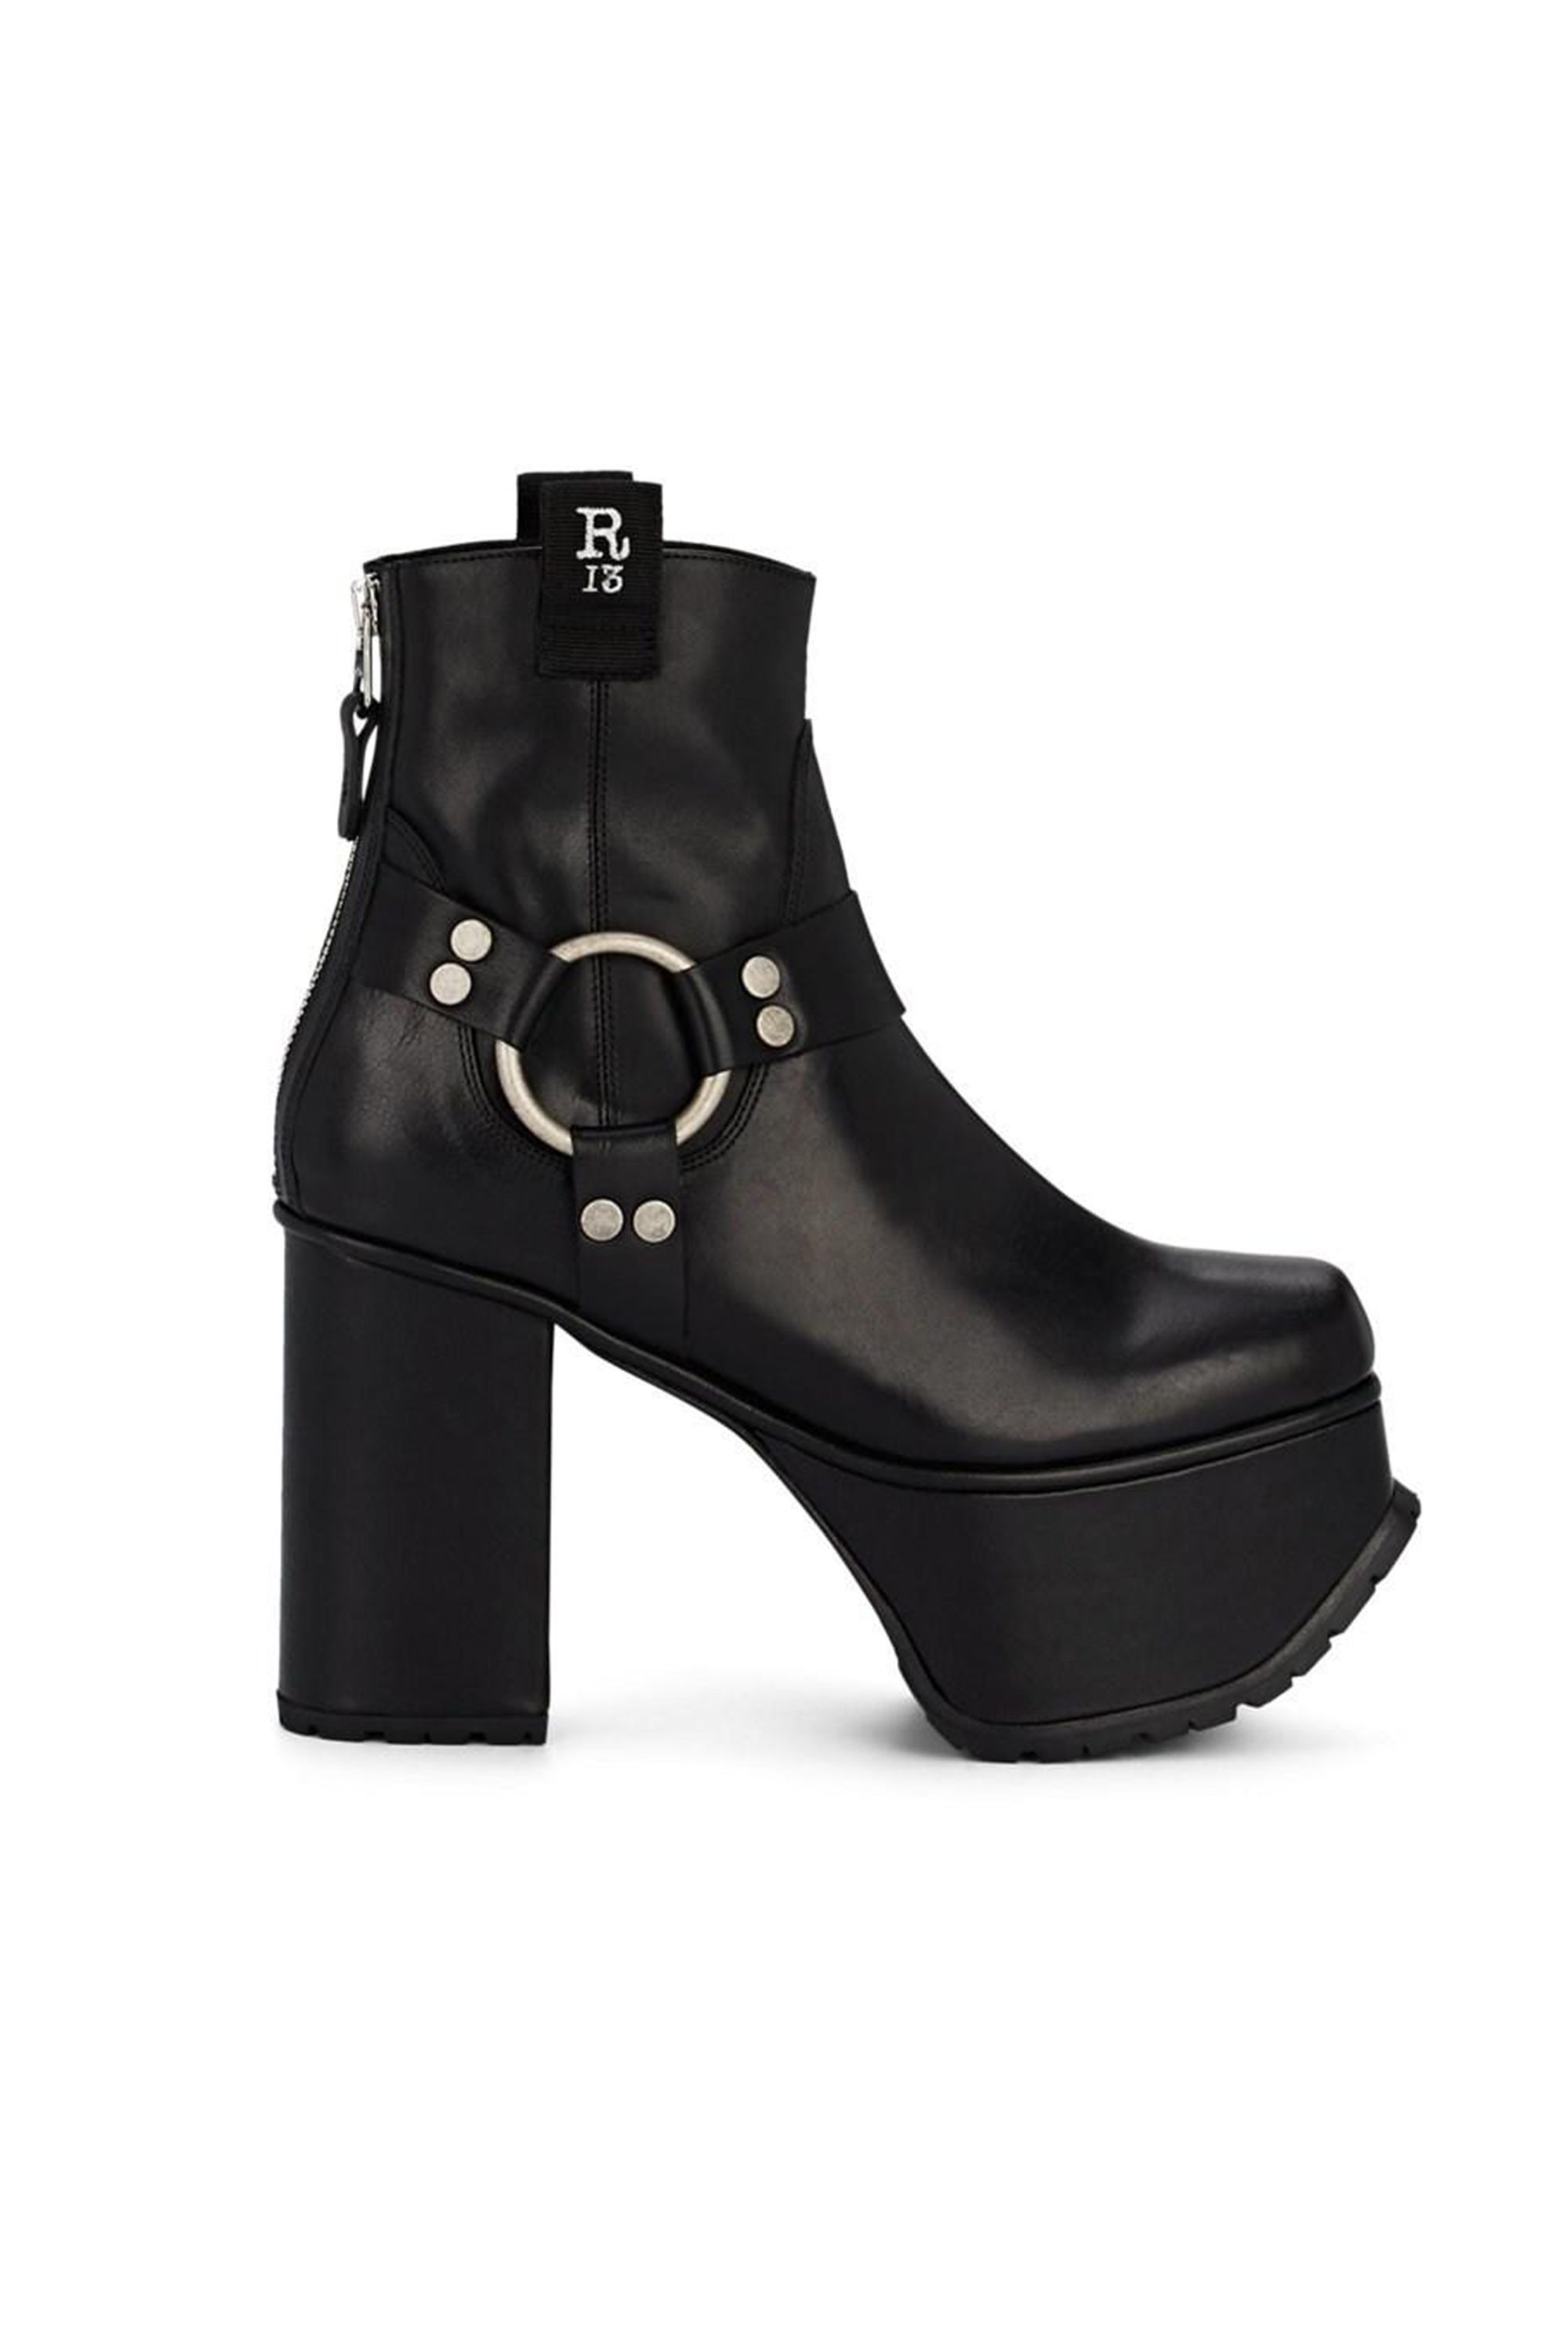 goth shoes brands